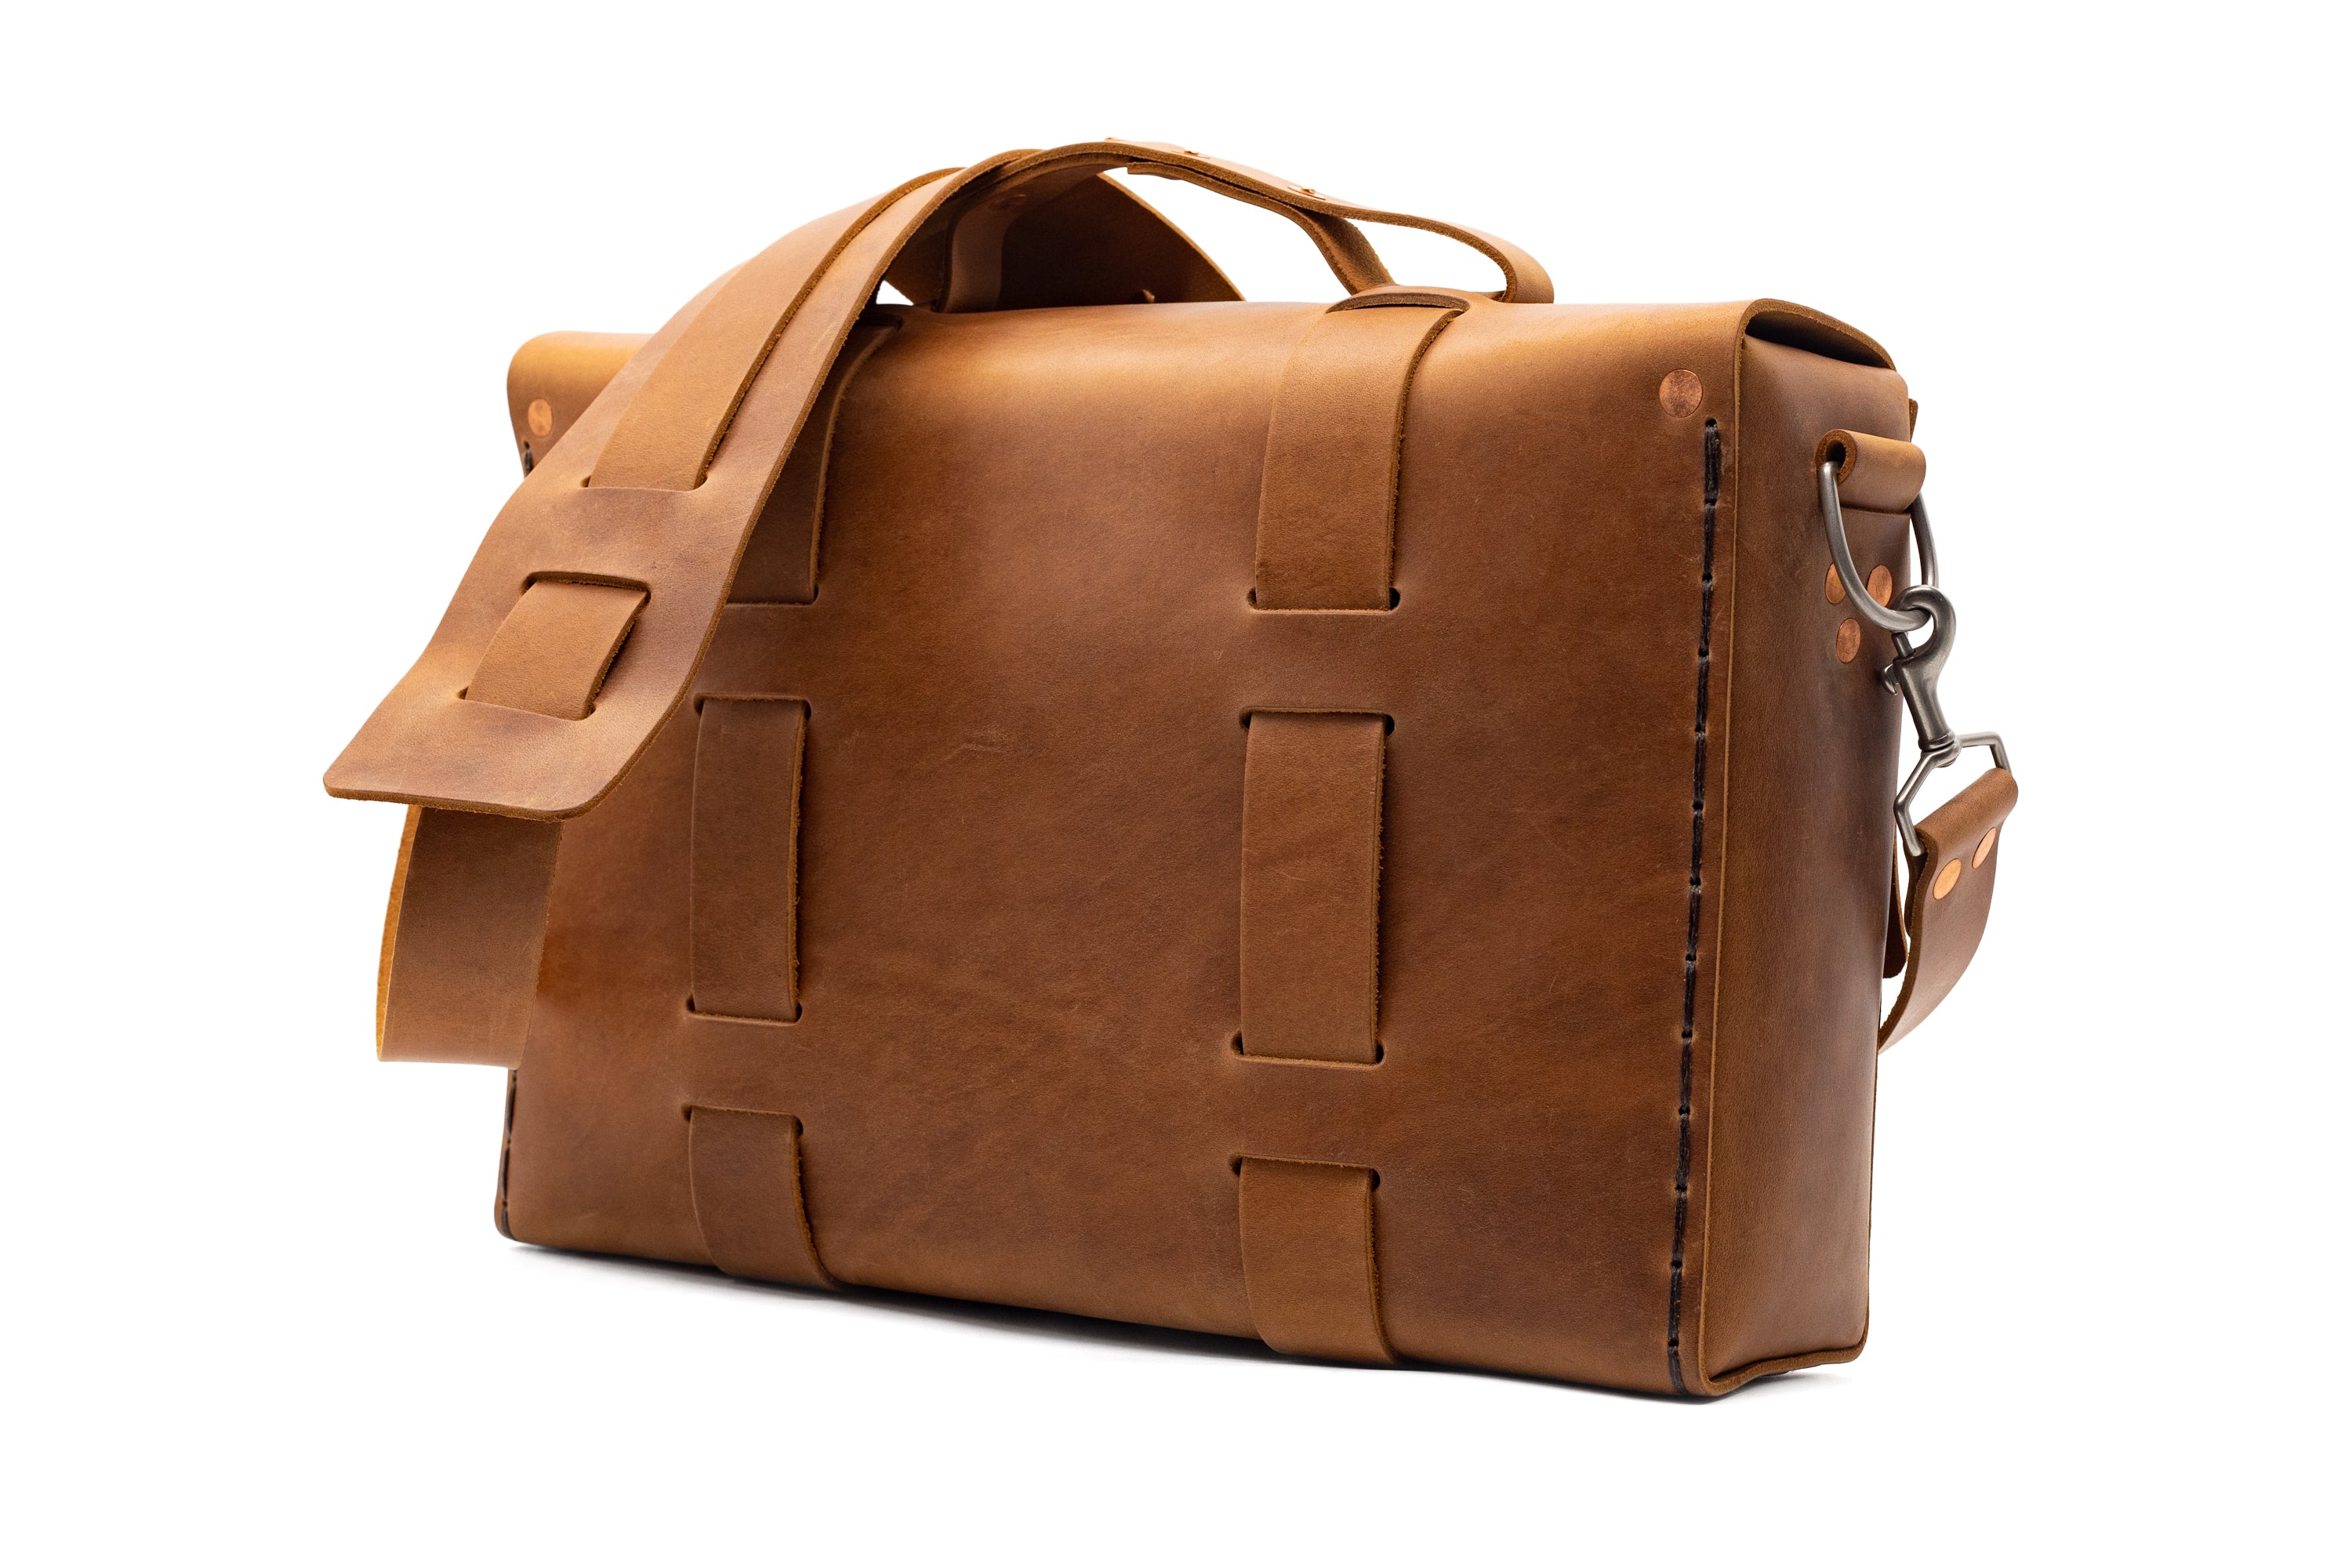 Limited Edition No. 4313 - Minimalist Standard Leather Satchel in Summer Beach - ONLY 2 MADE!